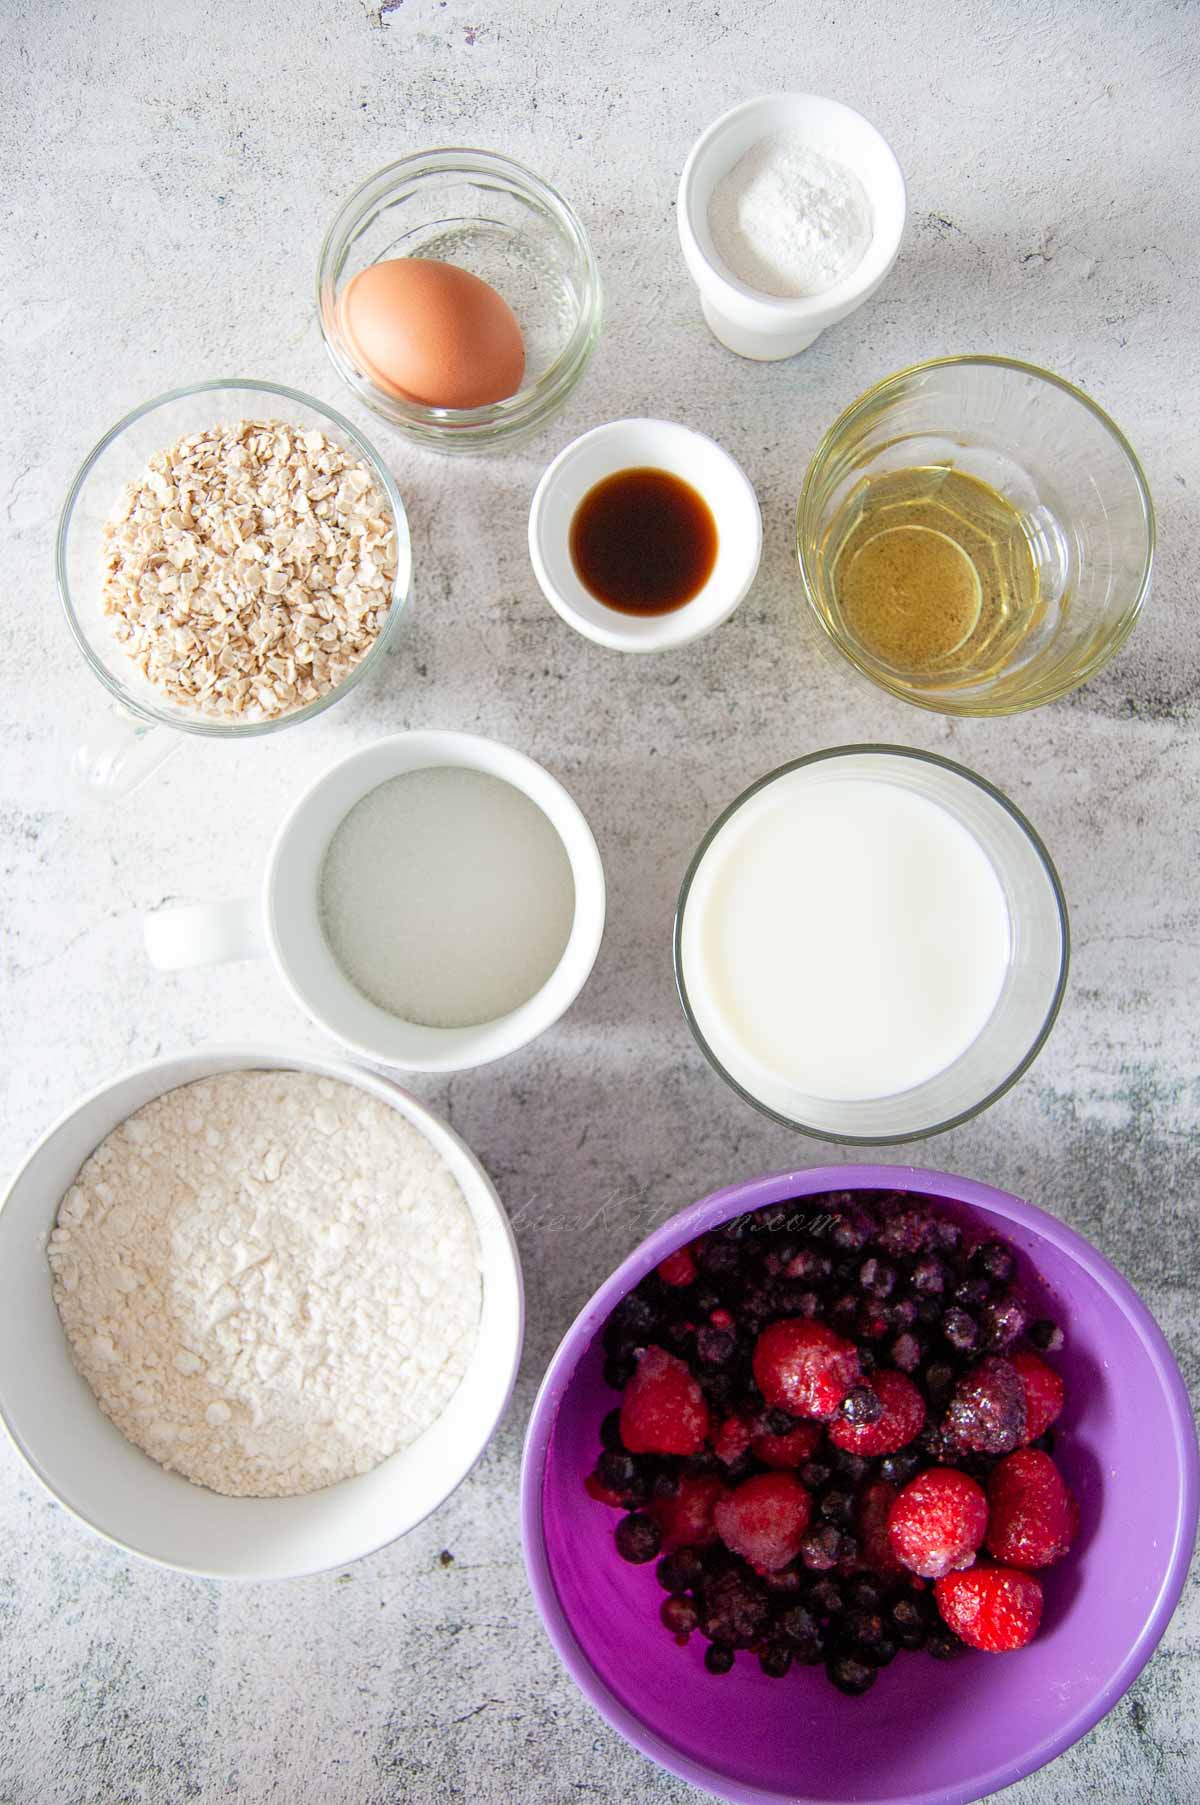 A top down photo of bowls with dry and wet ingredients for baking, including flour, oats, frozen fruit, milk, oil.